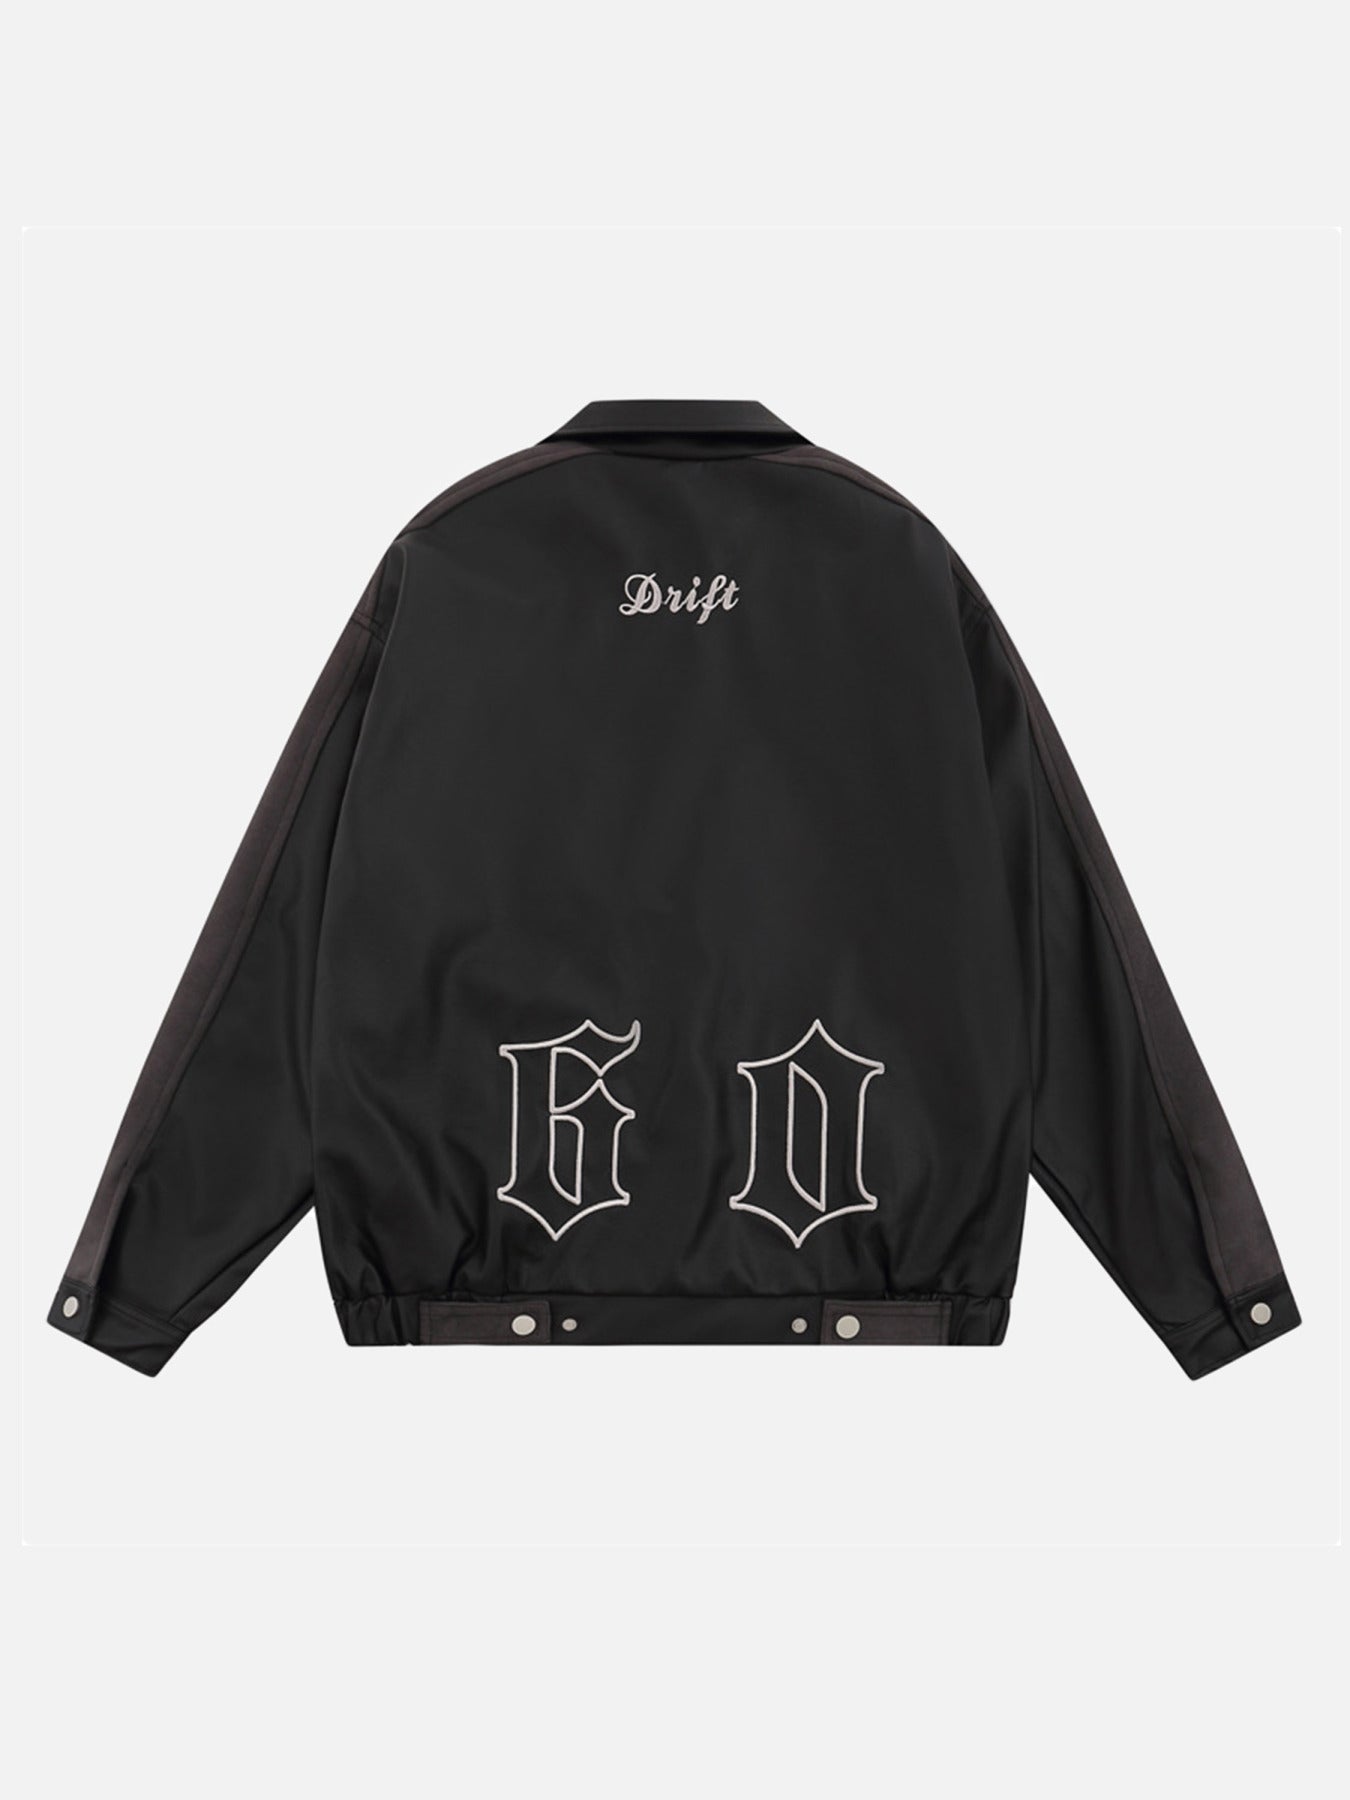 The Supermade Hip Hop Pu Leather Patchwork Jacket